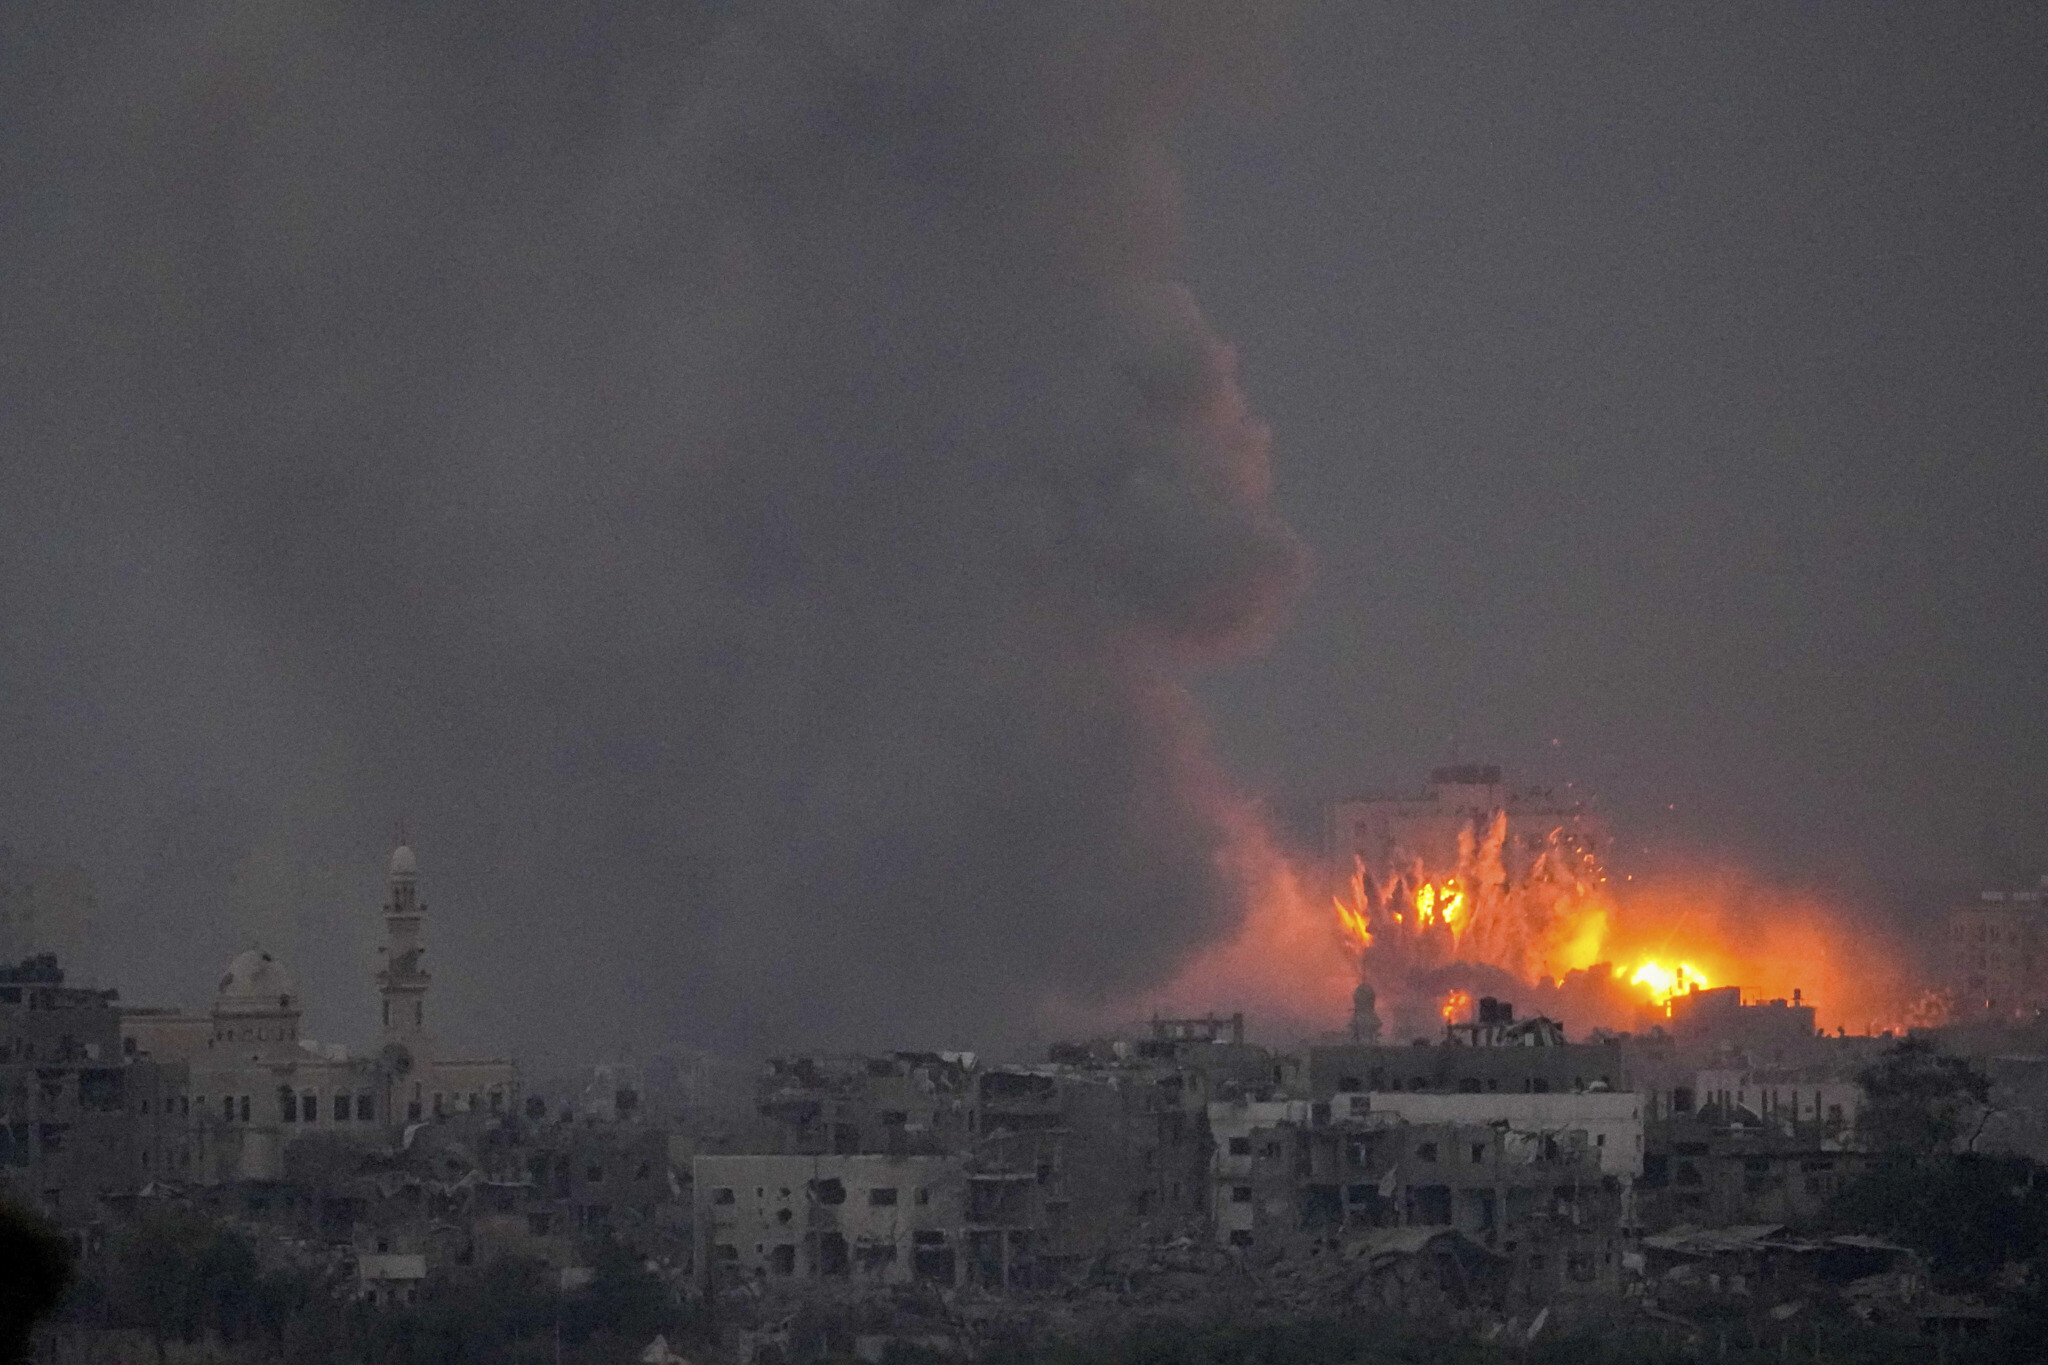 Chronicle of Significant Events: Israel’s Conflict with Gaza, Day 158